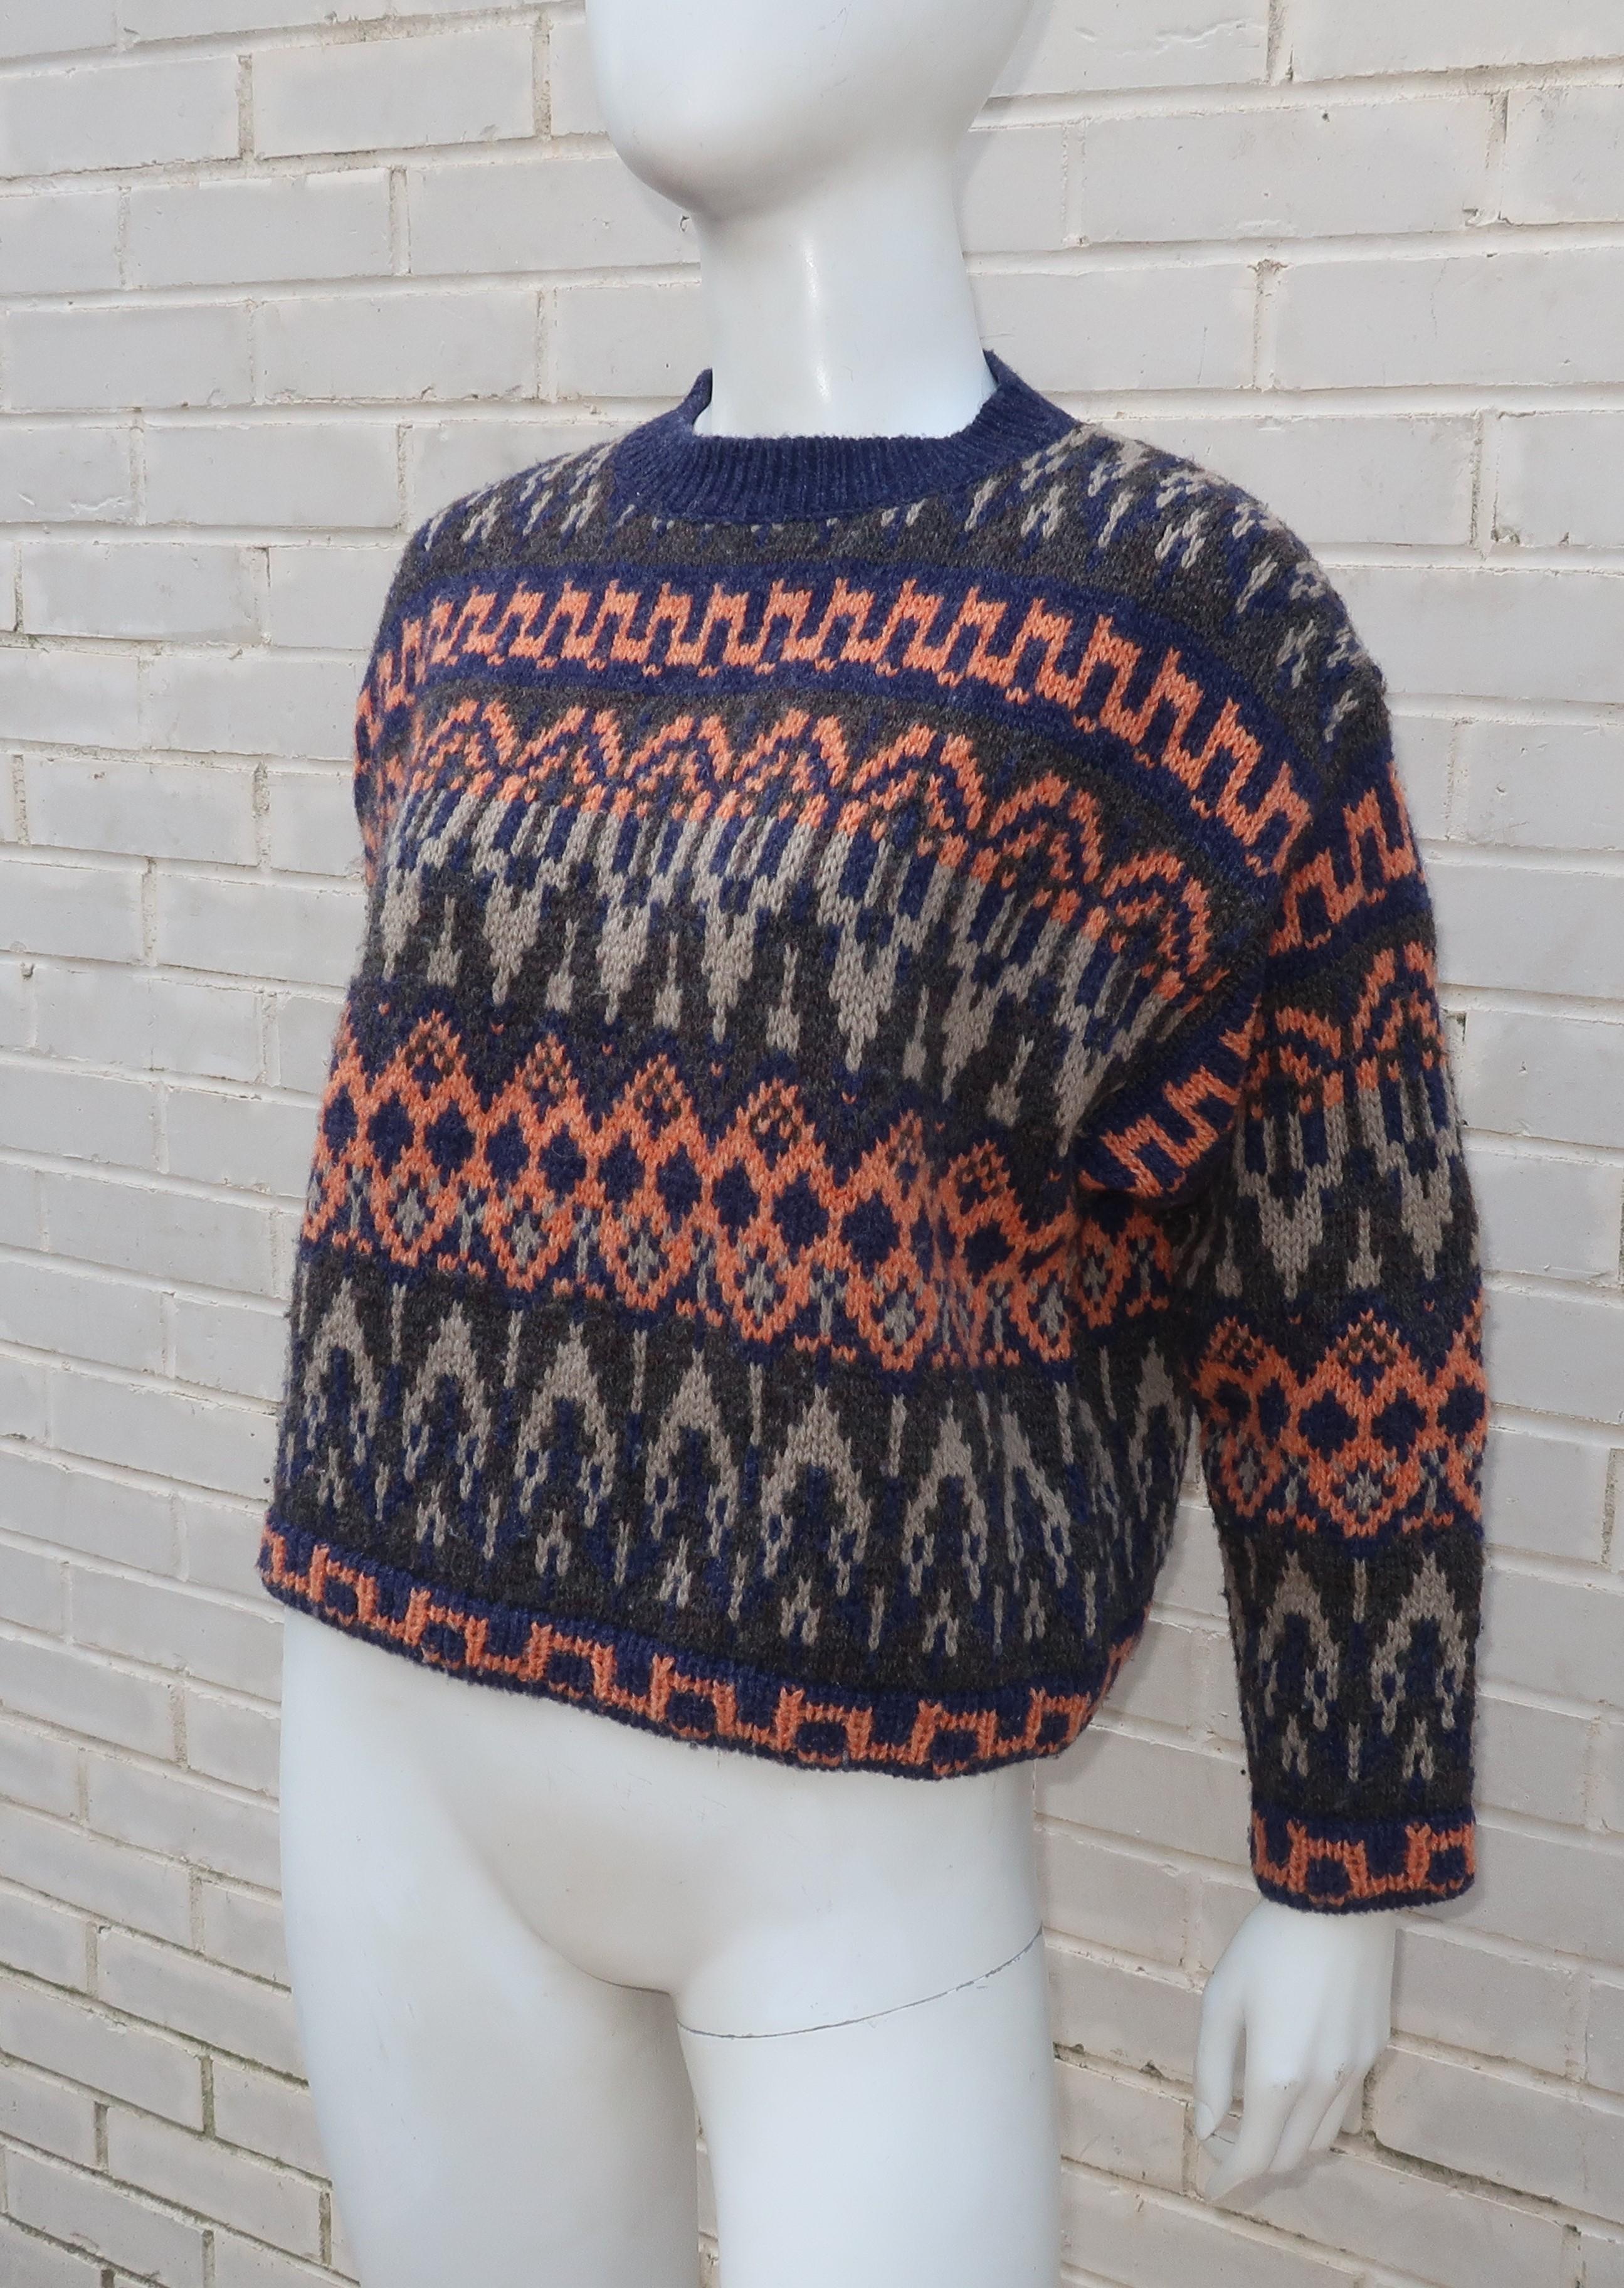 If you are a child of the 1980's, then you will remember the 'United Colors of Benetton' and the colorful and sometimes controversial ads featuring youthful faces in sporty Italian attire.  This Fair Isle style pullover sweater fits right in and has